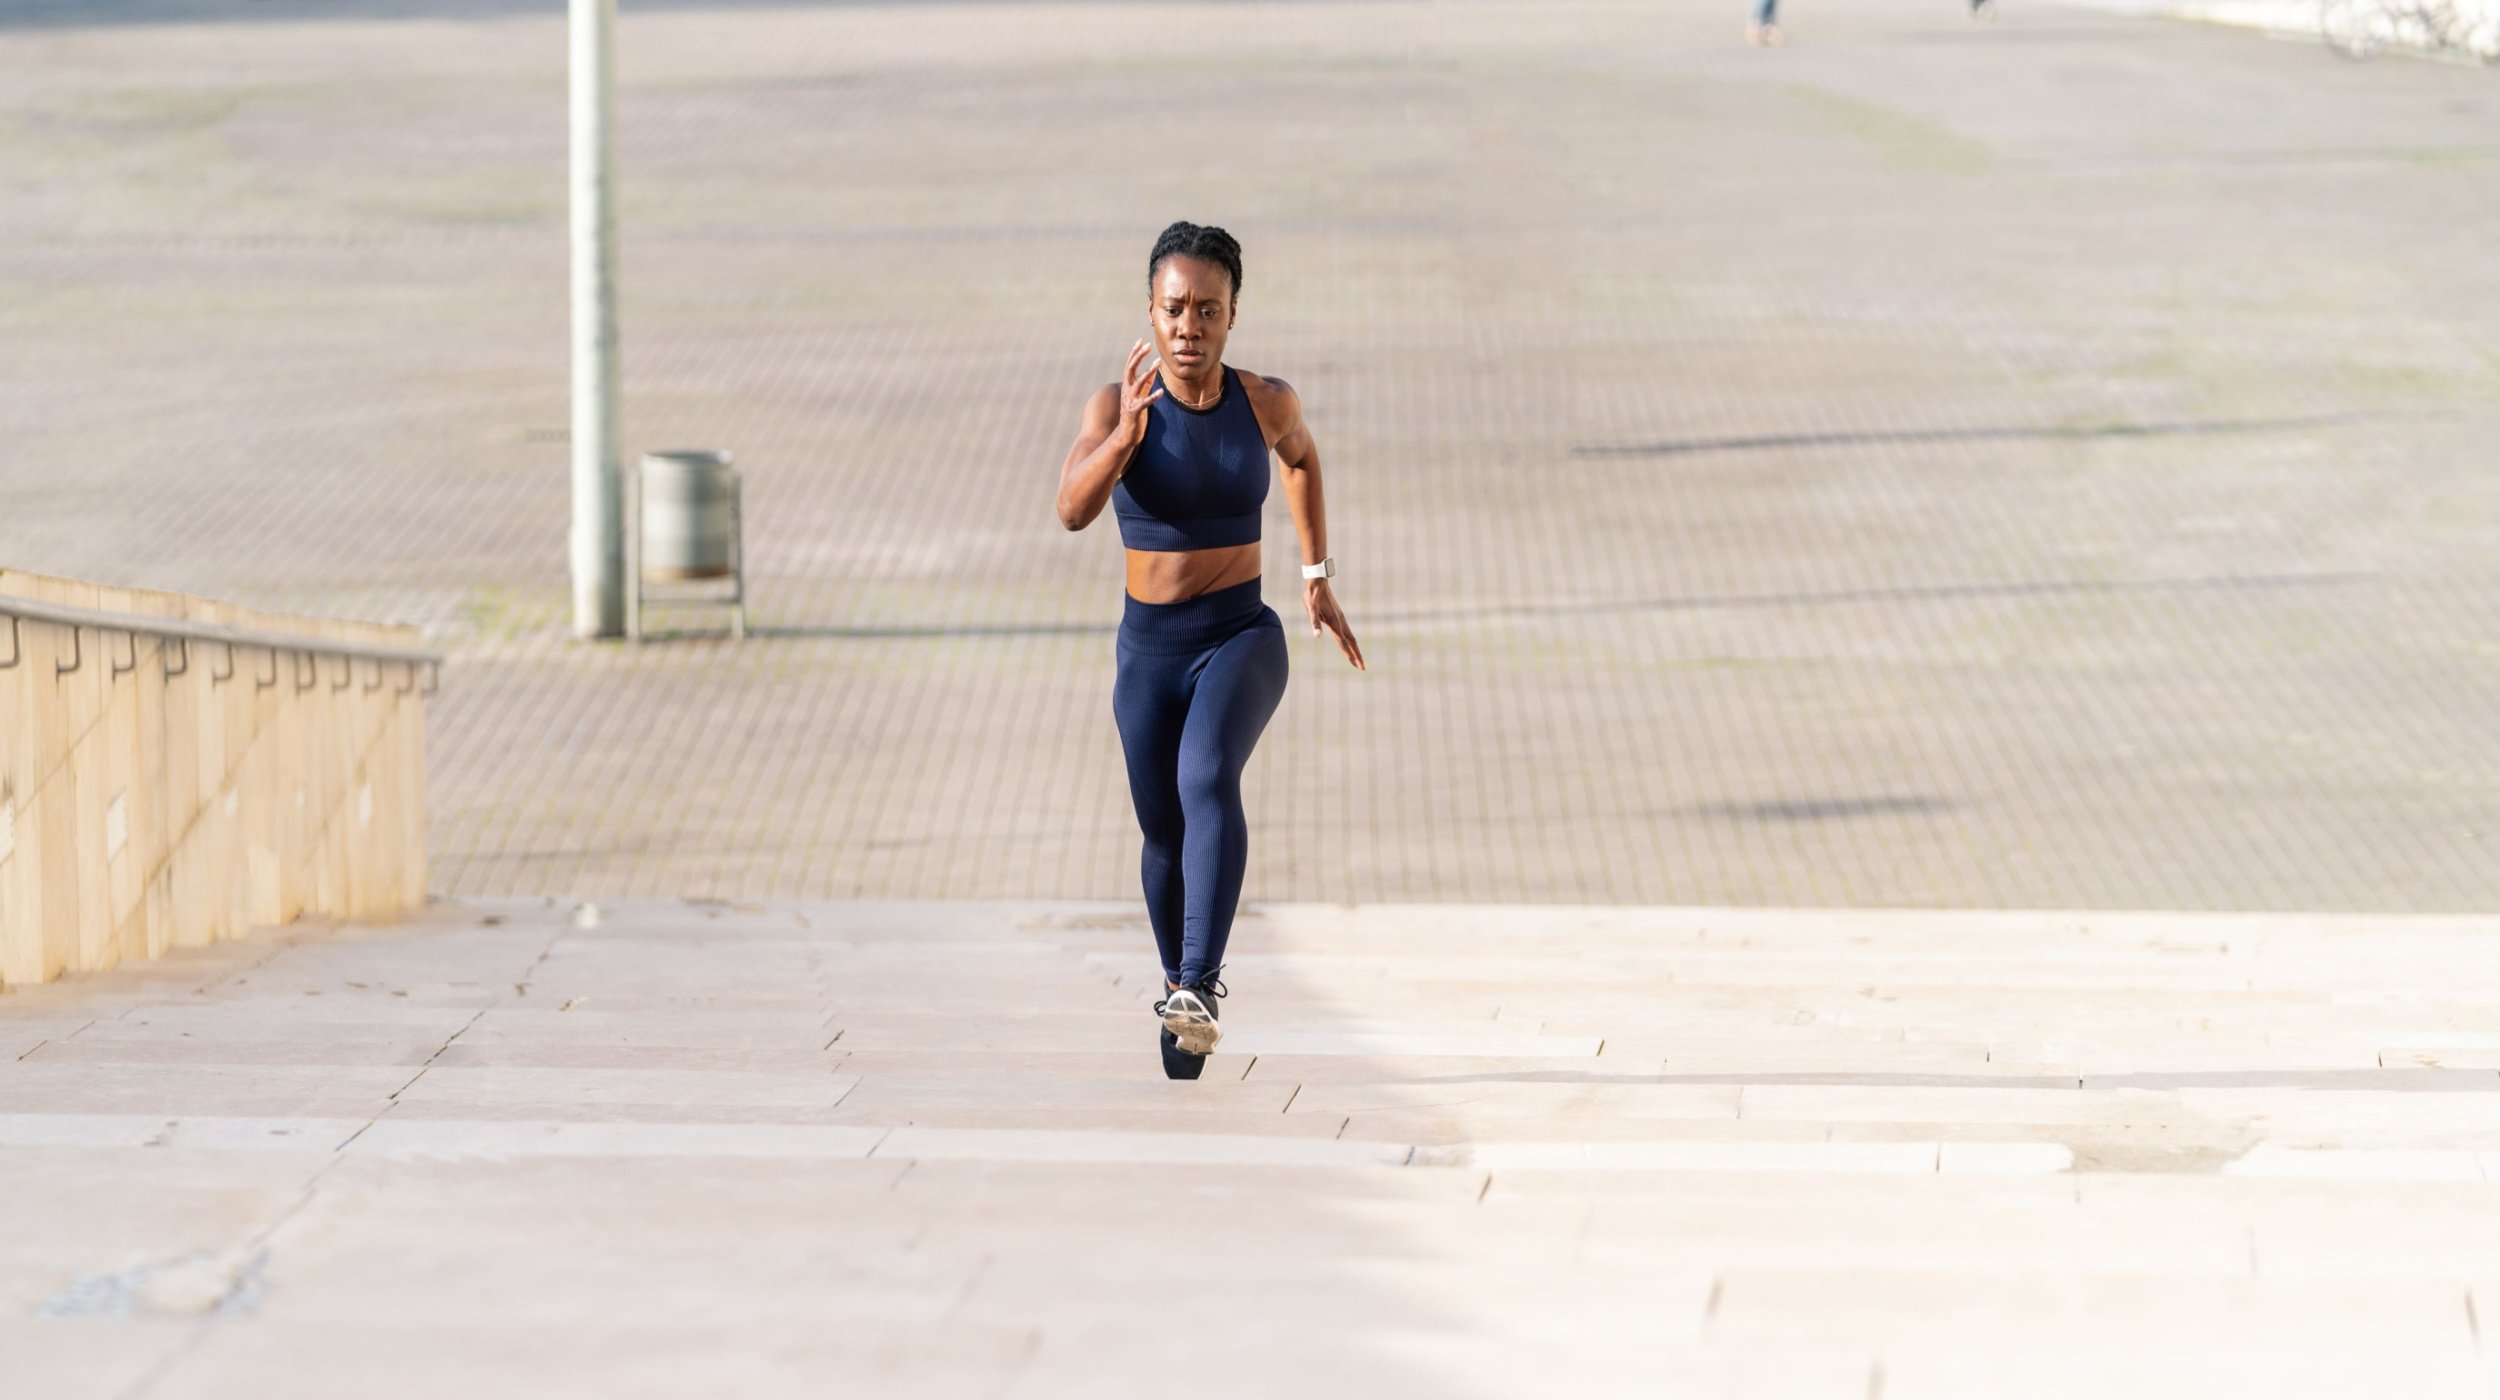 Is Cardio a Good Form of Exercise?